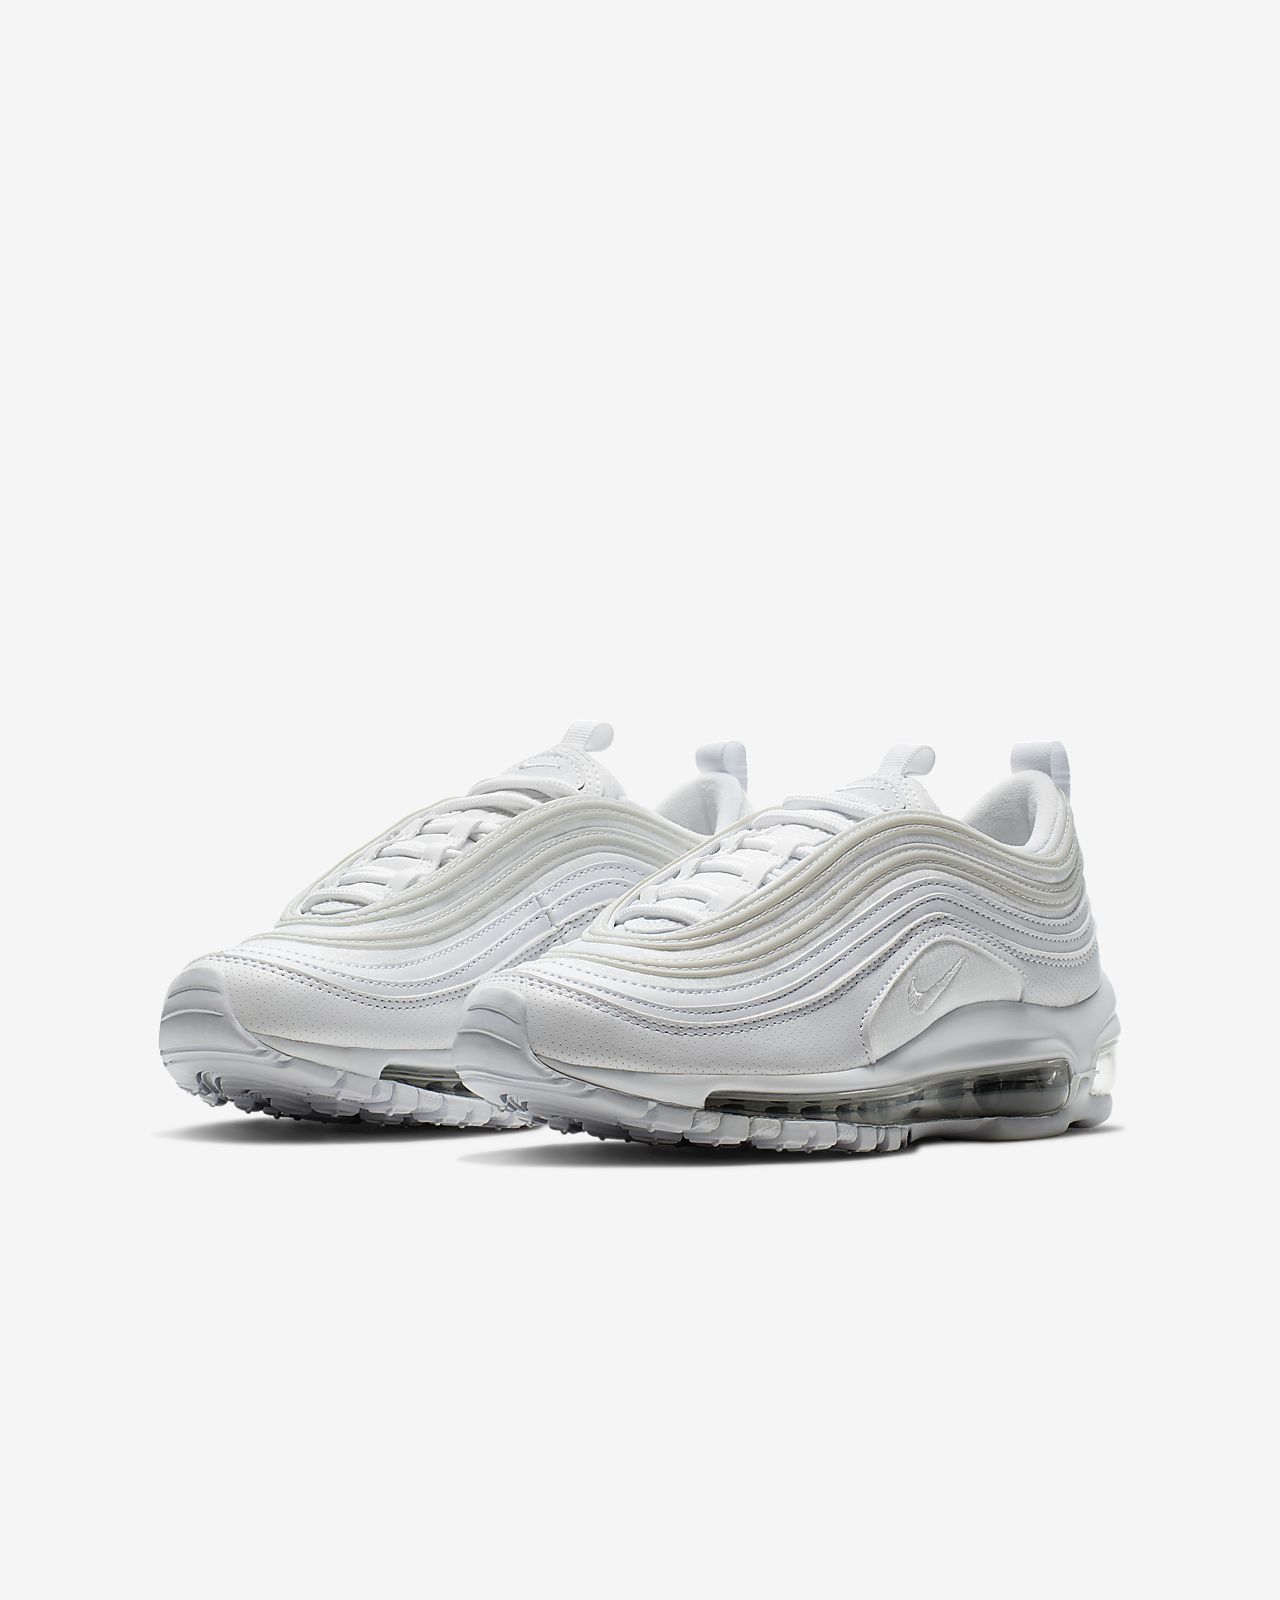 97s for kids